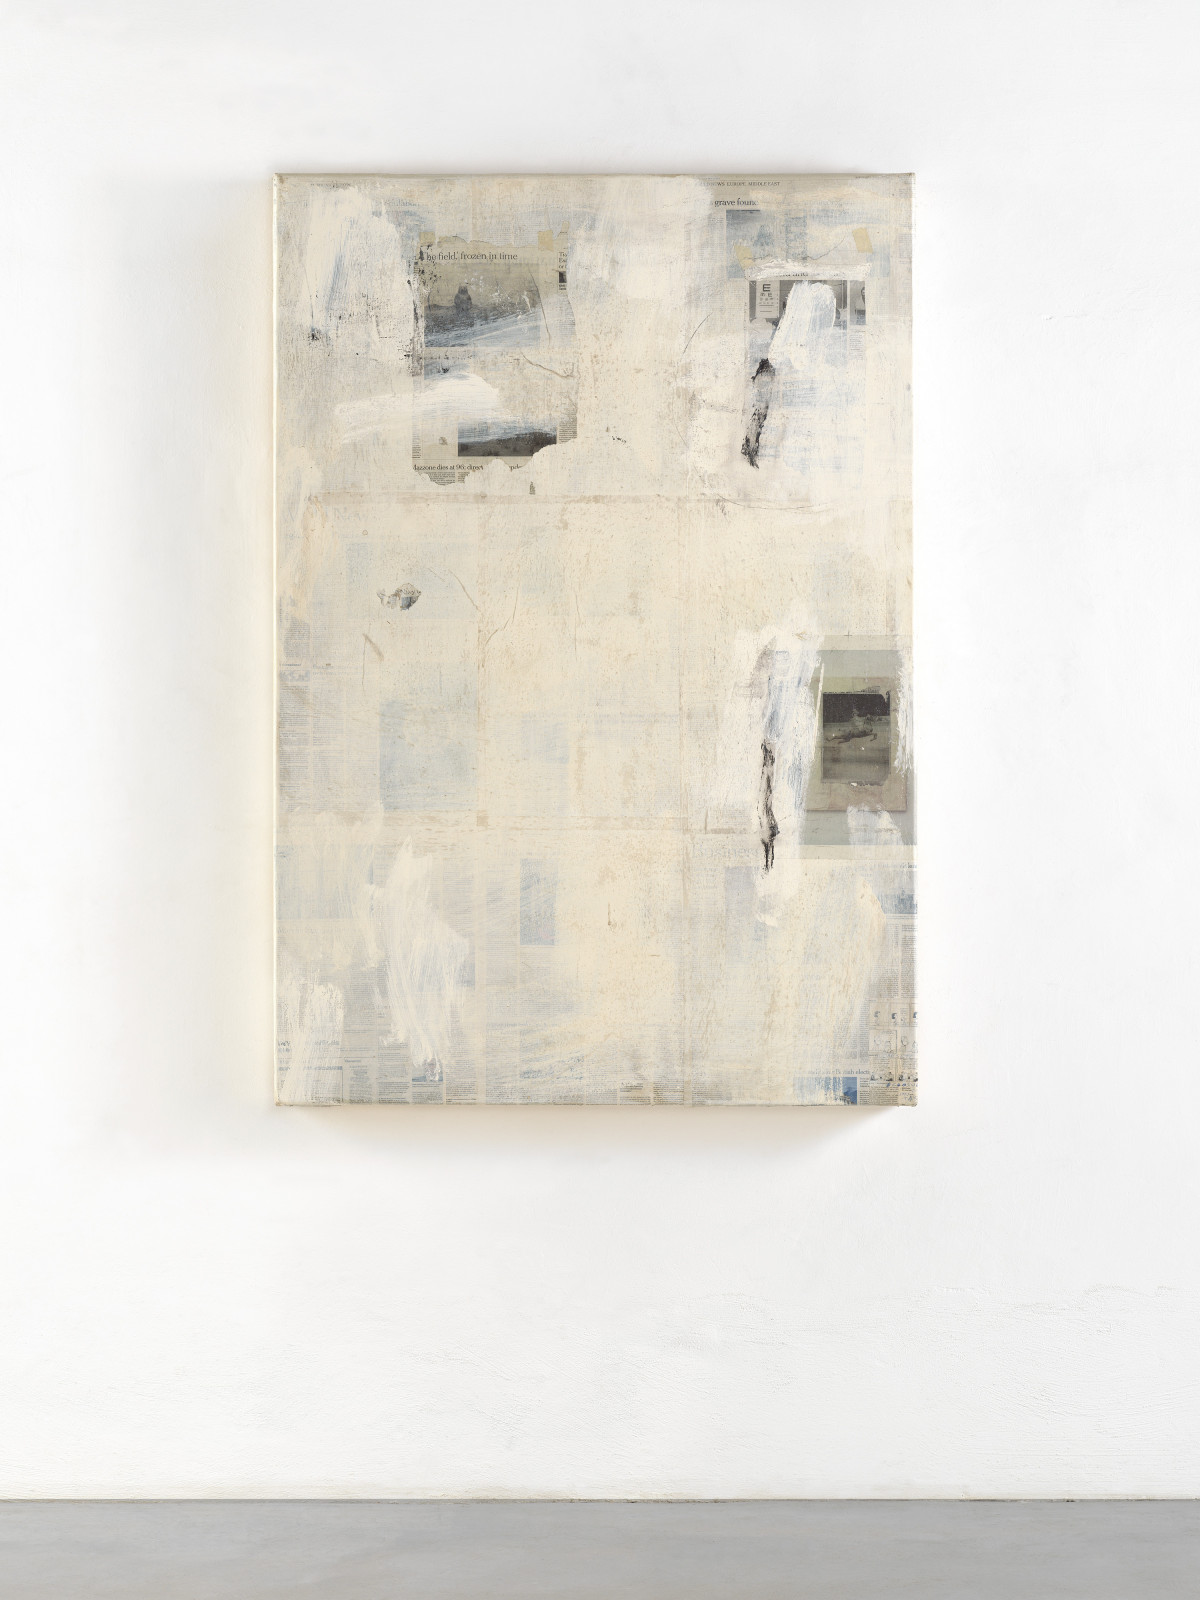 Lawrence Carroll, ‘Untitled (Newspaper painting)’, 2018, House paint, wax, newspaper on canvas on wood